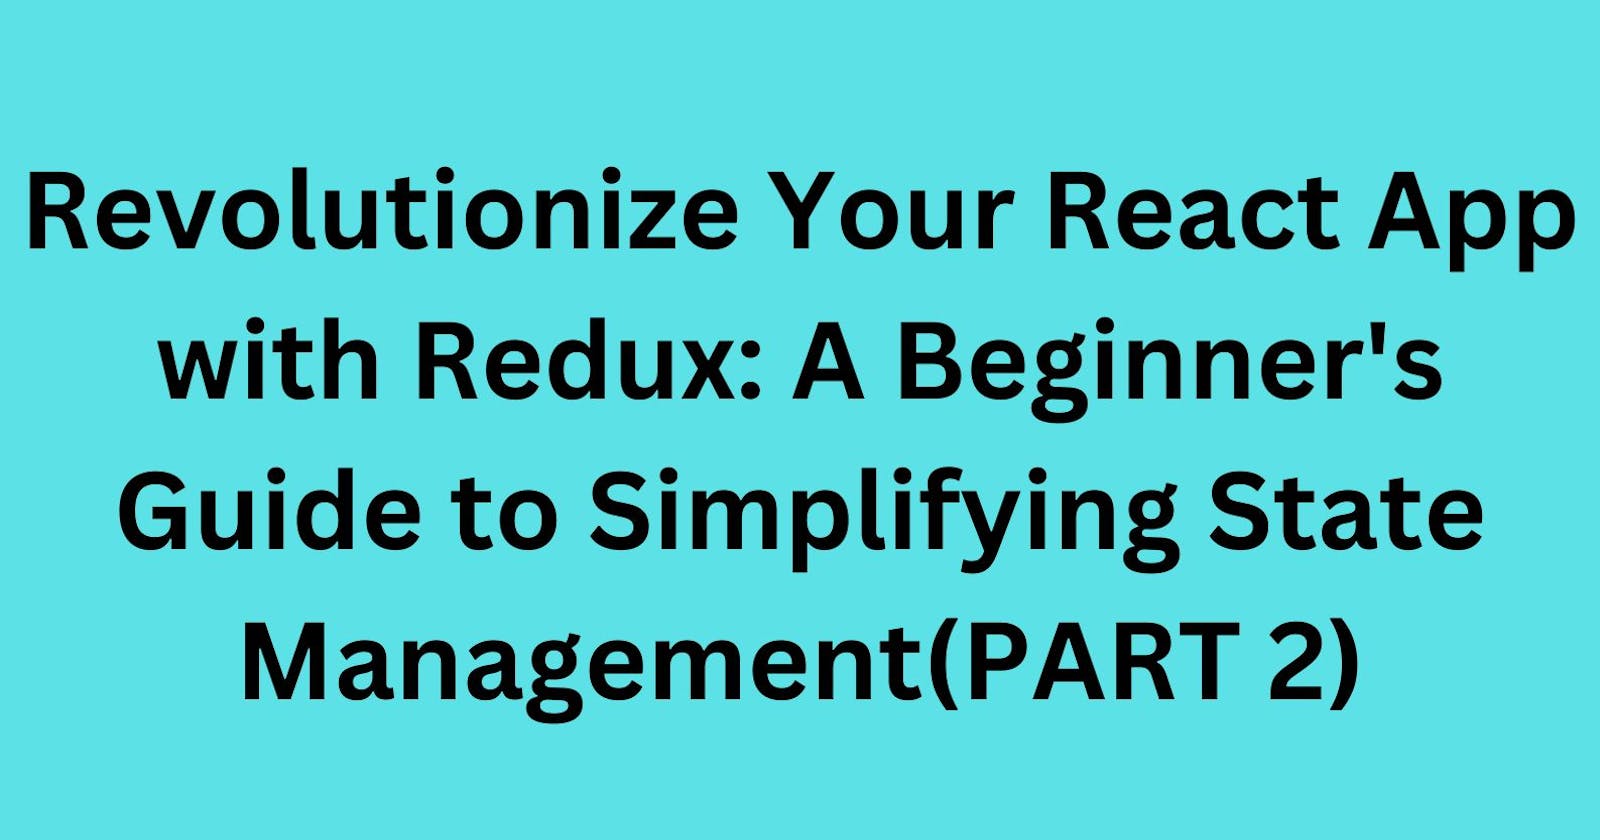 Revolutionize Your React App with Redux: A Beginner's Guide to Simplifying State Management(PART 2)